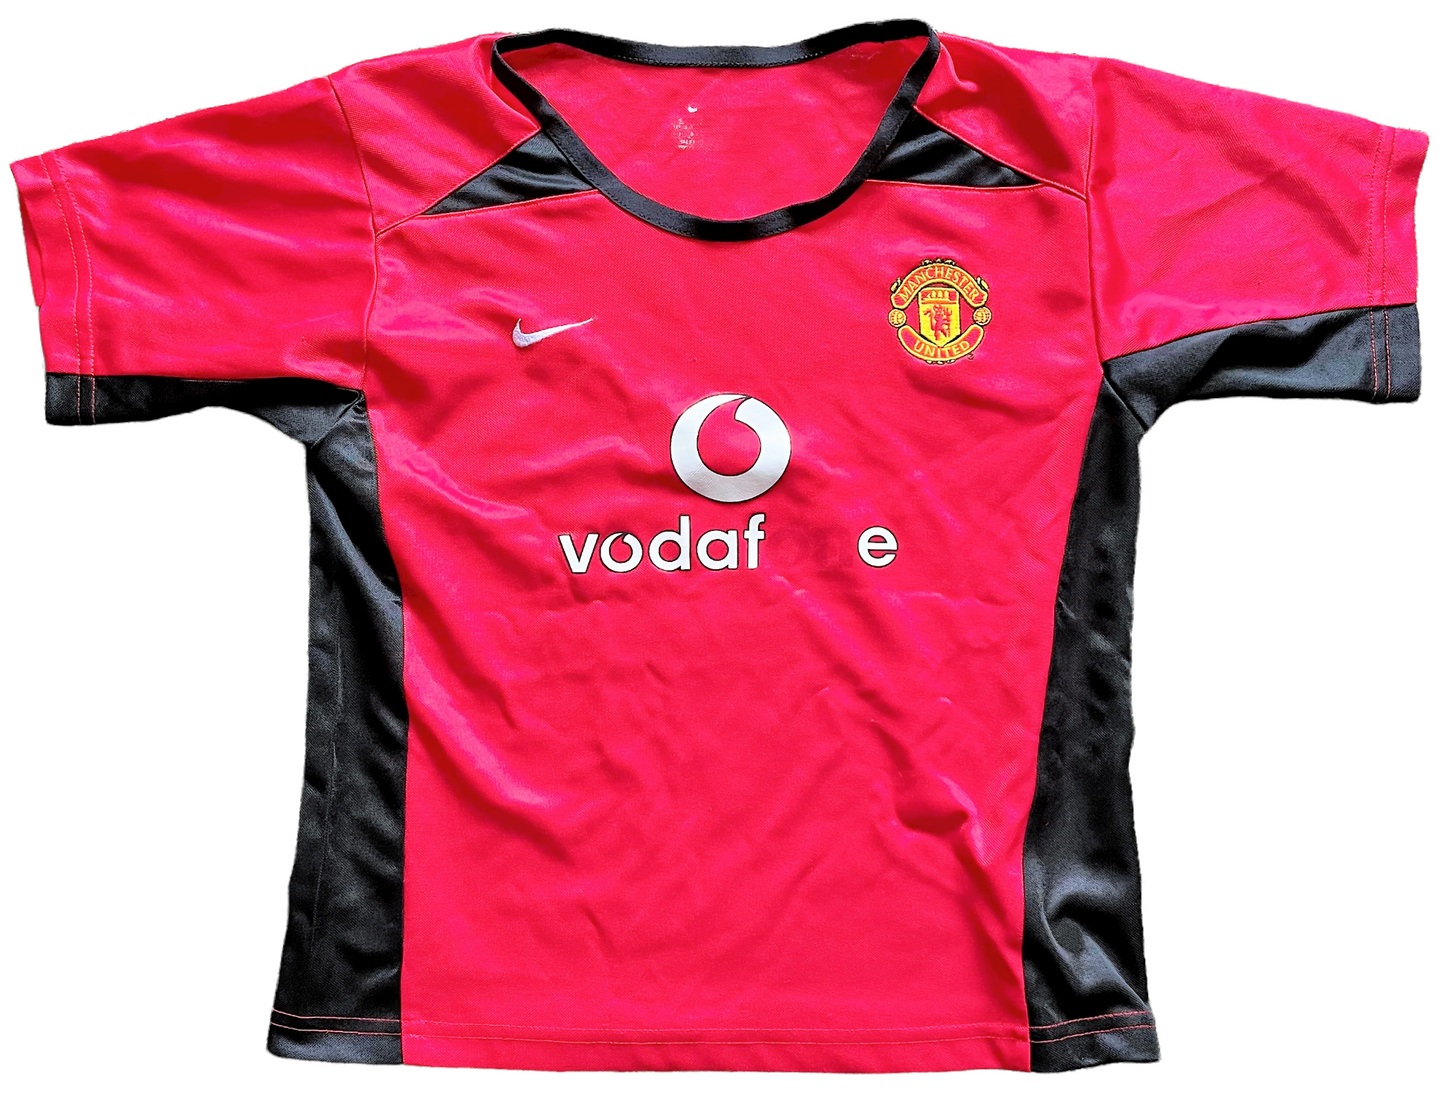 2002-04 Man United Home Shirt (average) no size, 6 to 8 years